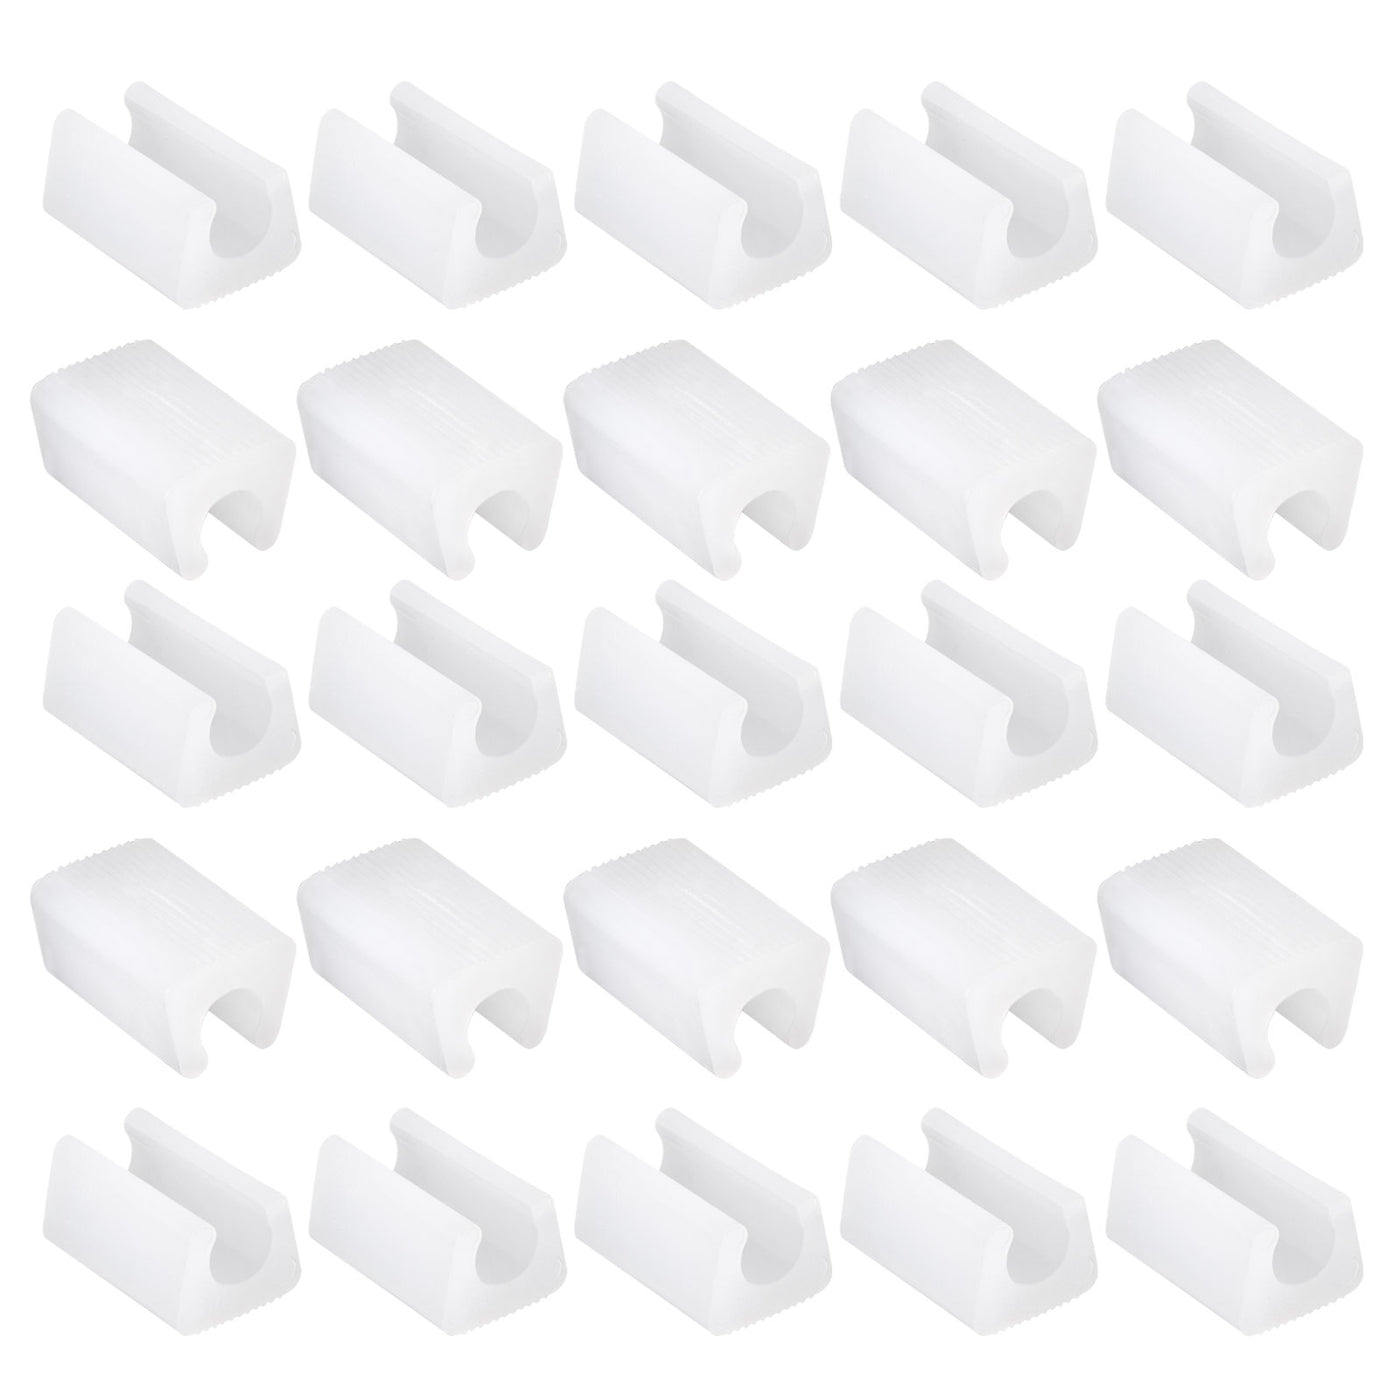 uxcell Uxcell 25Pcs Rectangle Shaped Non-Slip Chair Leg Tip 10mm Plastic Furniture Feet White